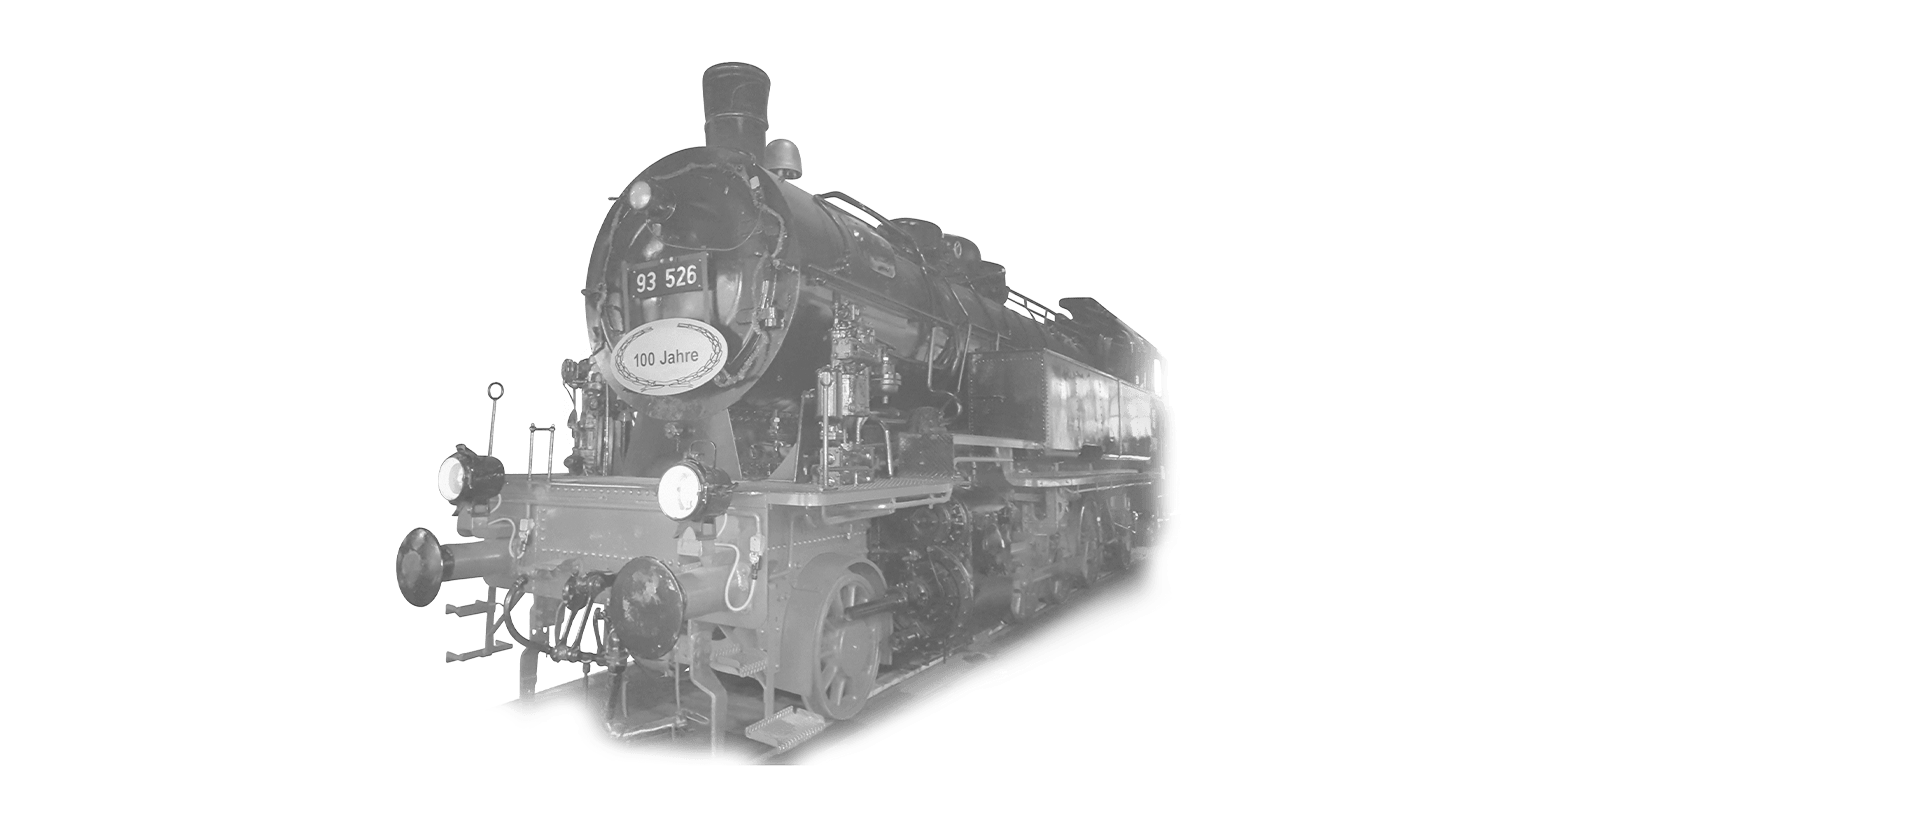 The locomotive 93-526 is coming towards the camera in black and white